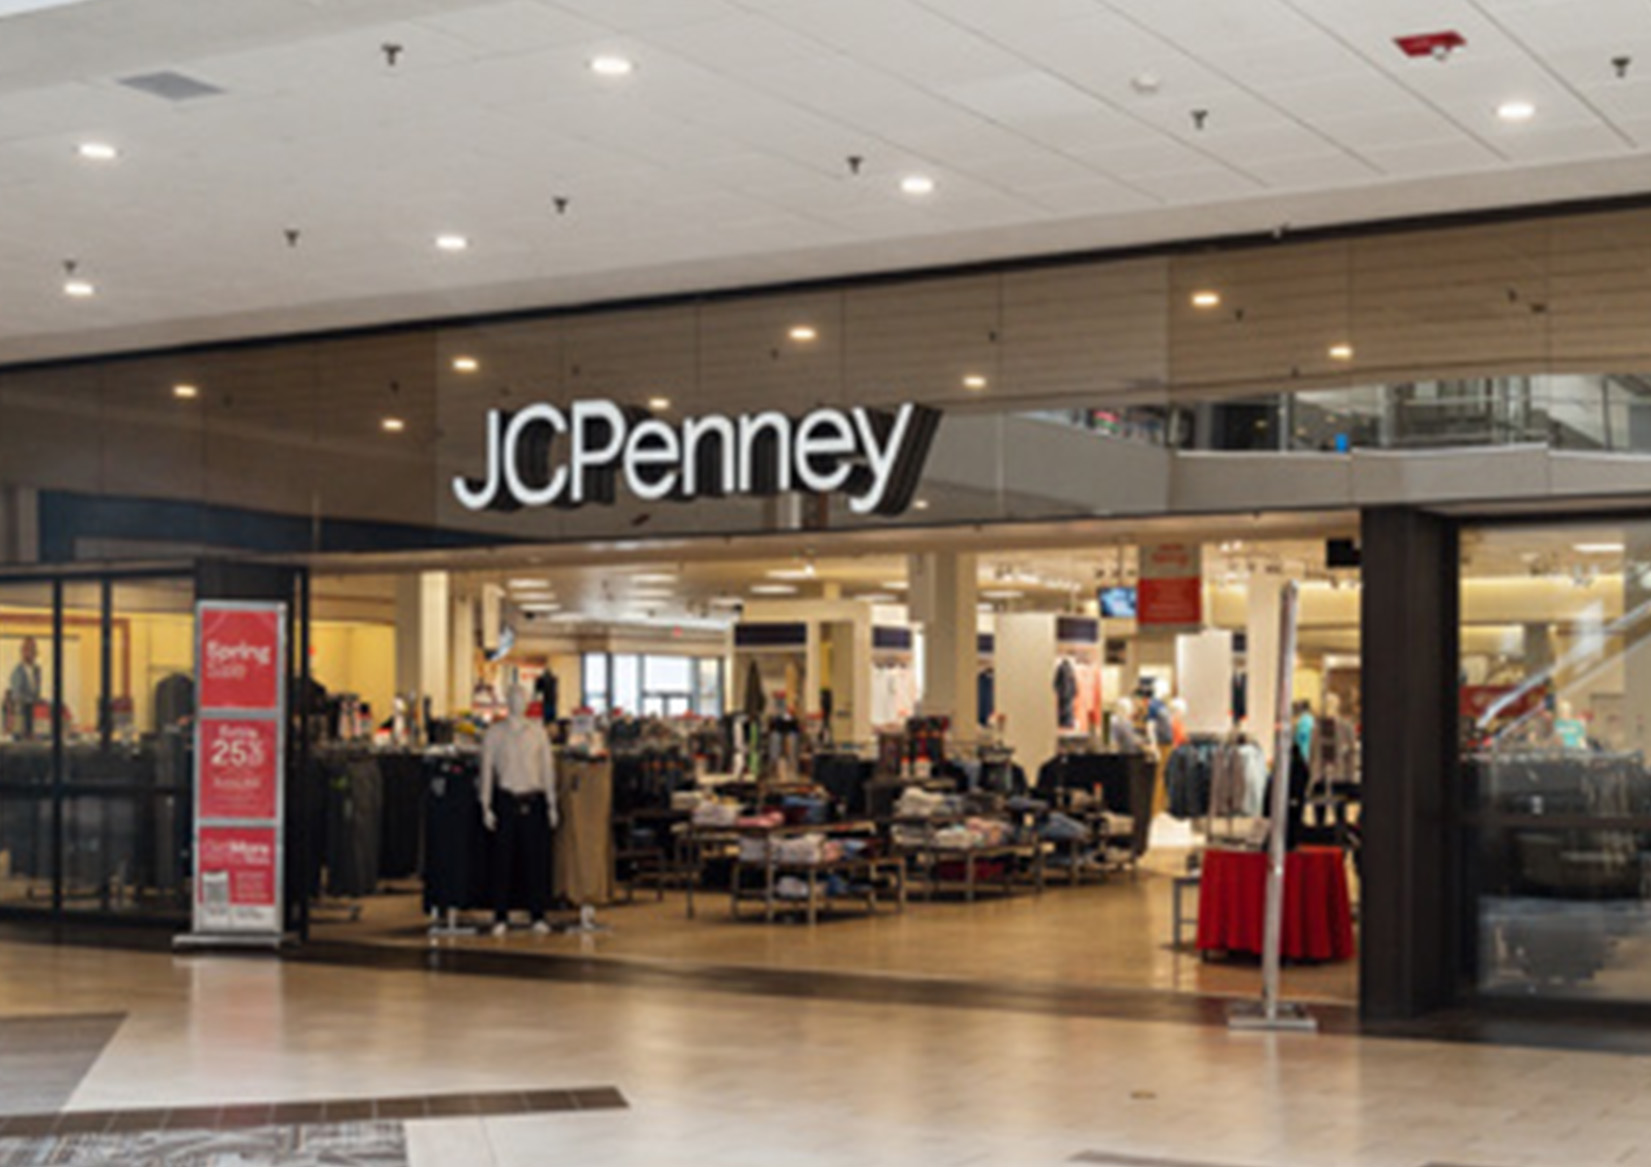 Iconic Underground Mall Near D.C. Closes Doors End of an Era for American Shopping Centers